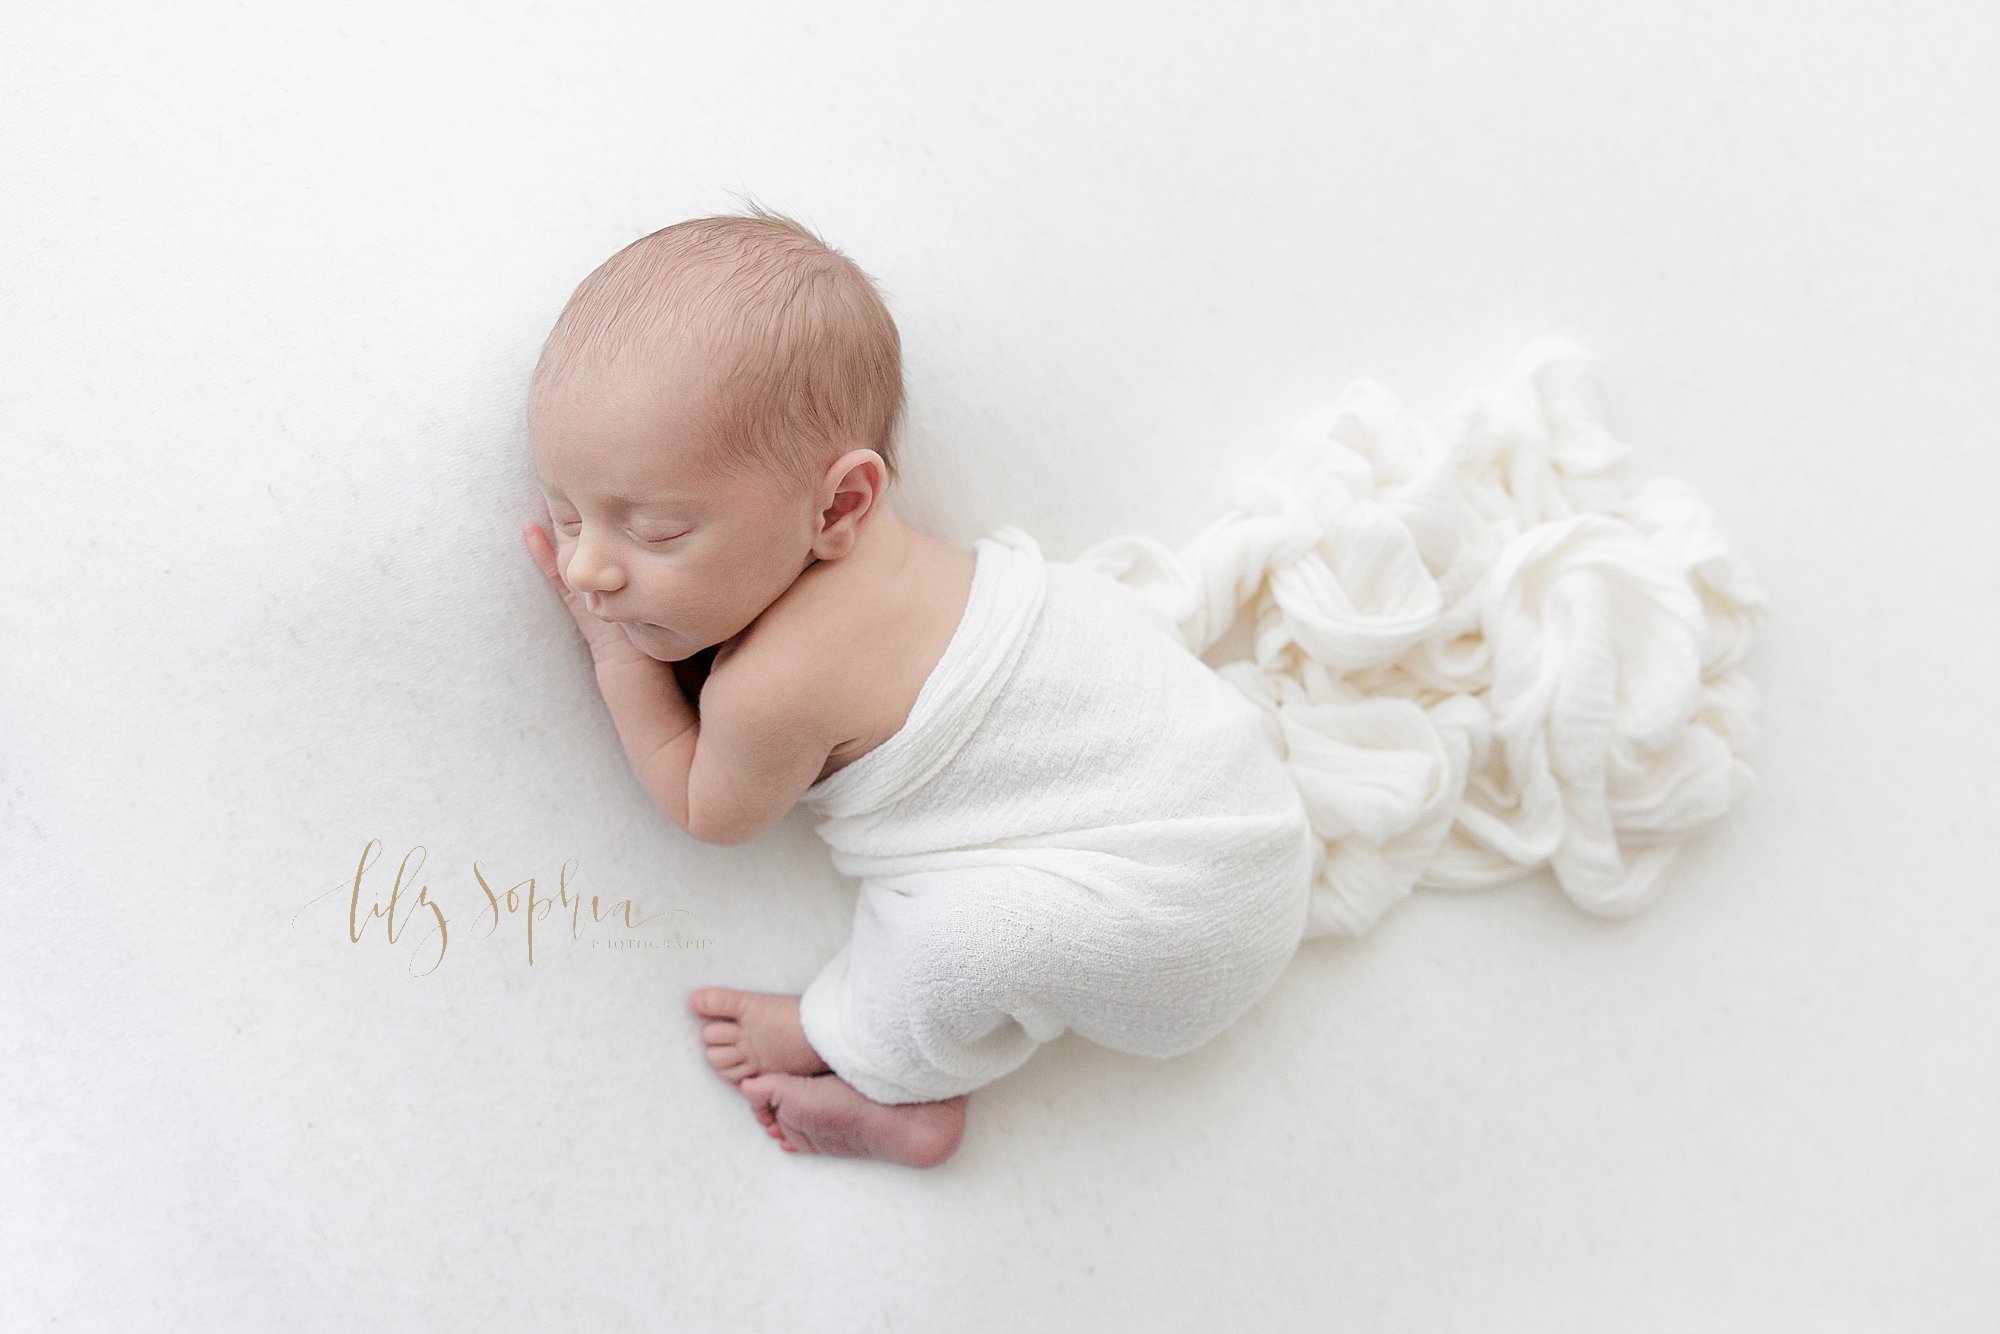  Newborn portrait of an infant boy as he sleeps on his side with his arms under his head and a soft white blanket drapes across him taken in a natural light studio near Virginia Highlands in Atlanta. 